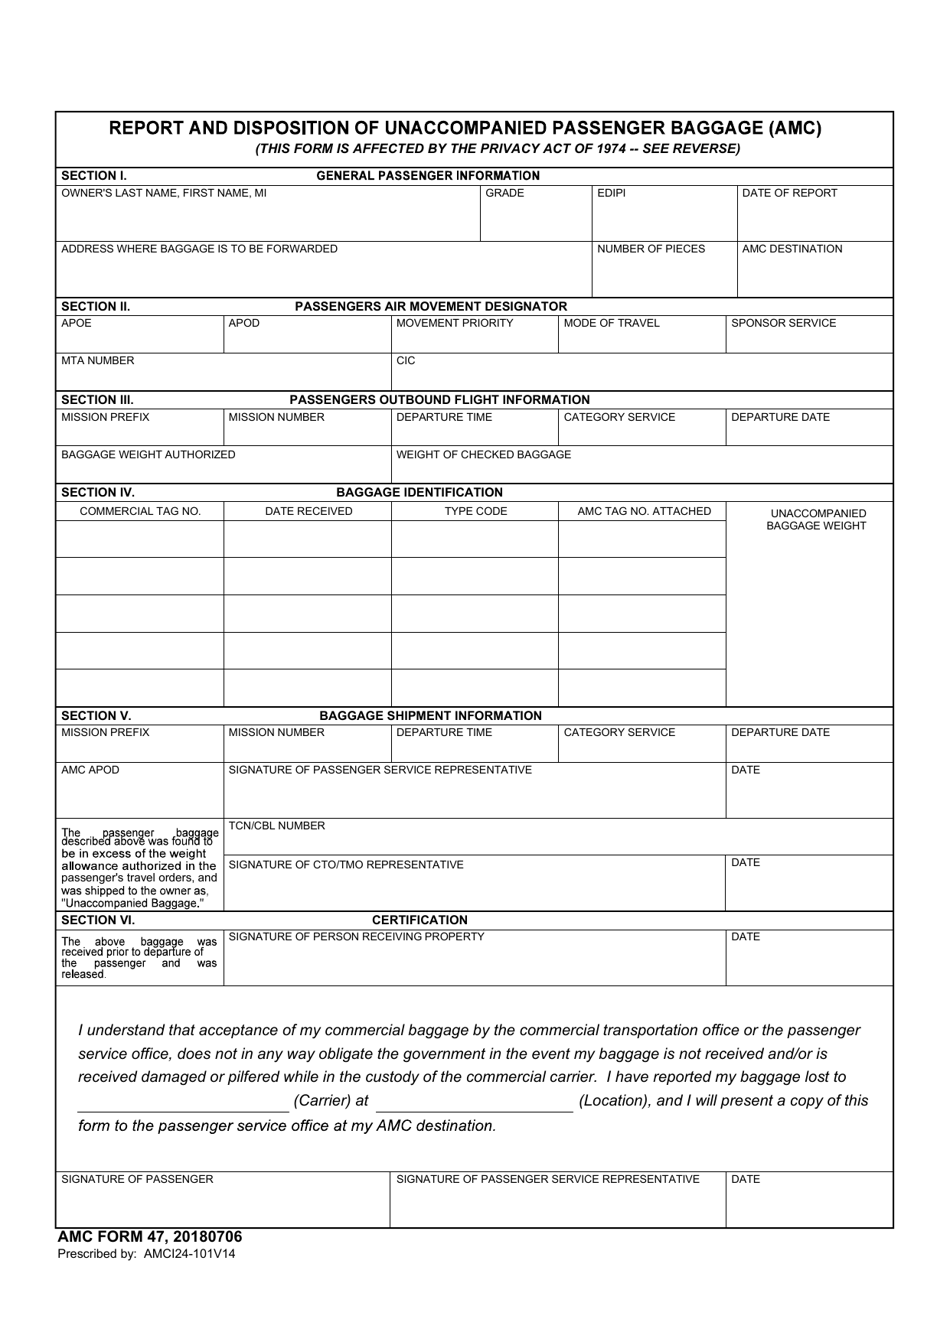 AMC Form 47 Report and Disposition of Unaccompanied Passenger Baggage (AMC), Page 1